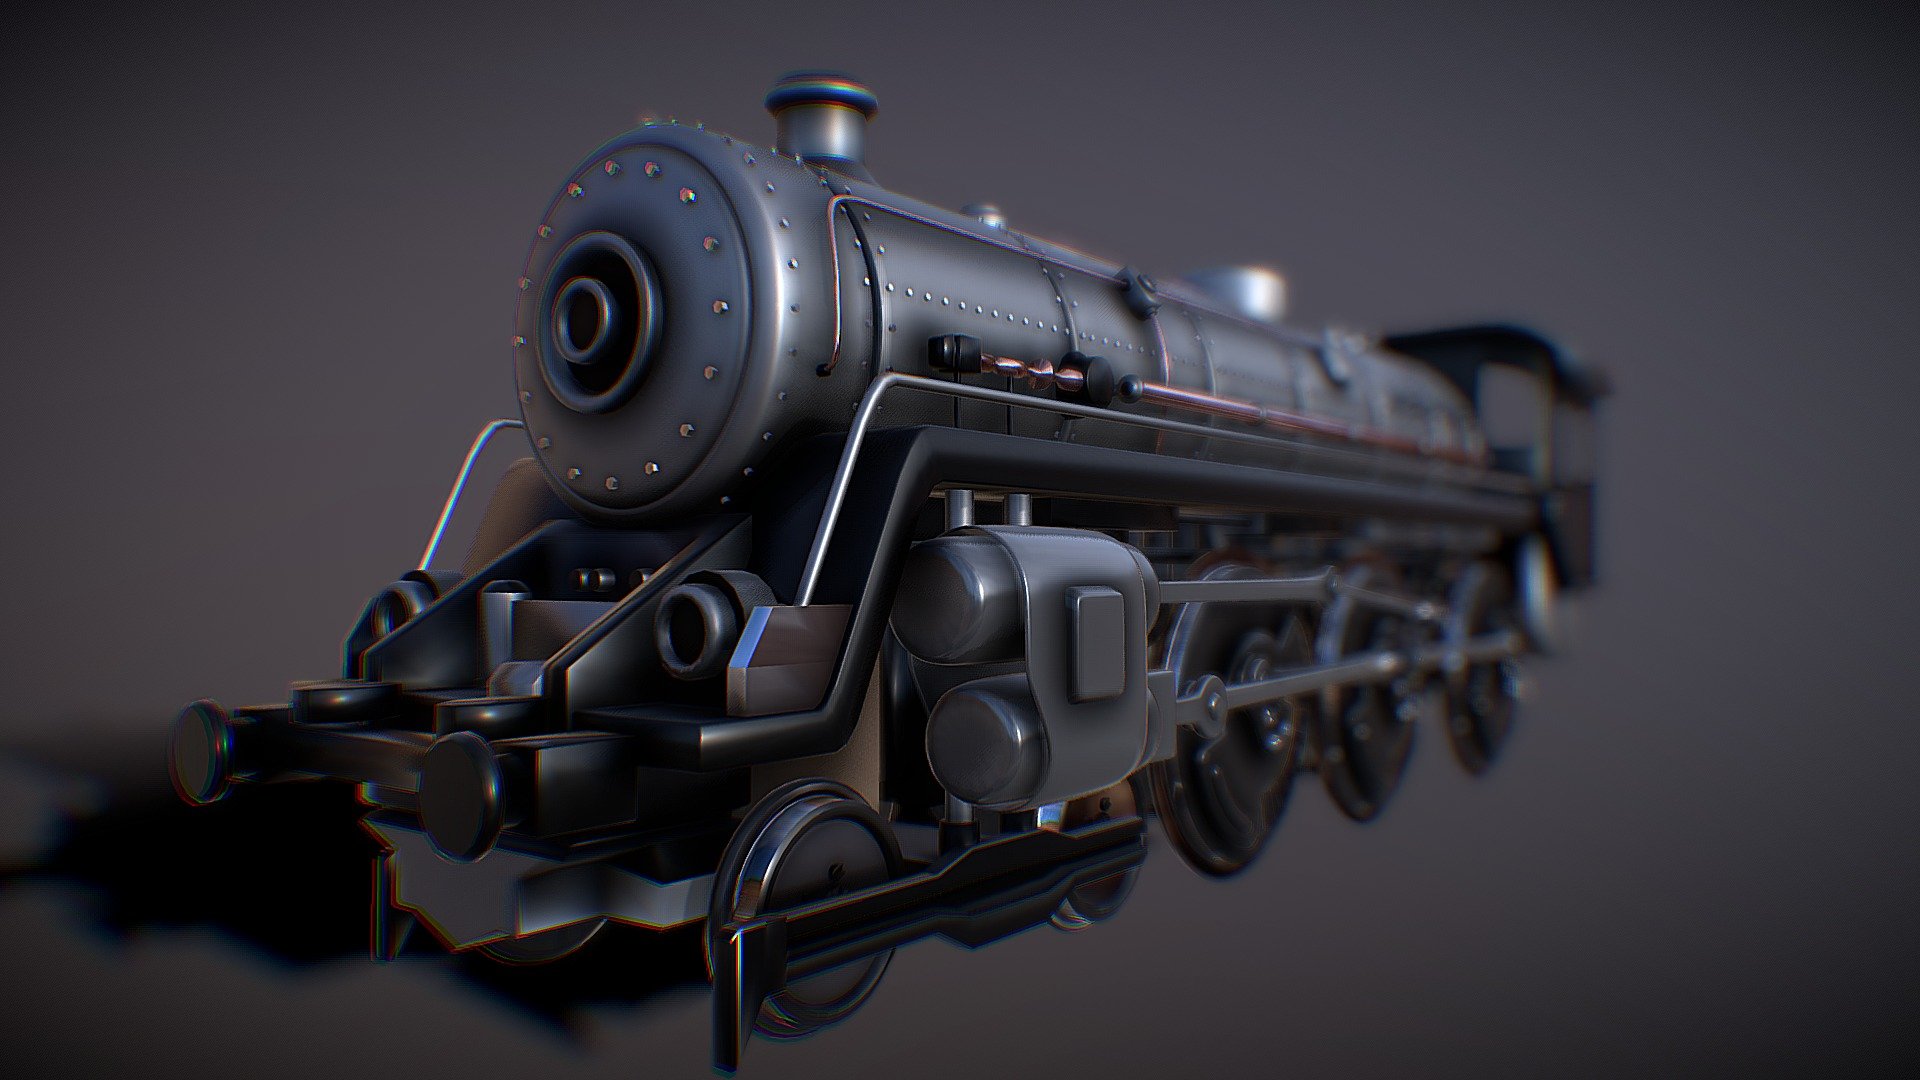 steam engine train
3d model of steam engine train modeled by me 
which is free to use in any purposes according to
Creators commons license
Renderings

If you are looking for the best quality models for your renderings, don’t look any further! Here you can find Steam engine train with all materials set up for Cycles and is also compatible with Eevee. It makes it a fast and easy one-click solution for scenes in all your most exciting projects. Don't waste time creating on your own and bring realism into your scenes 3d model